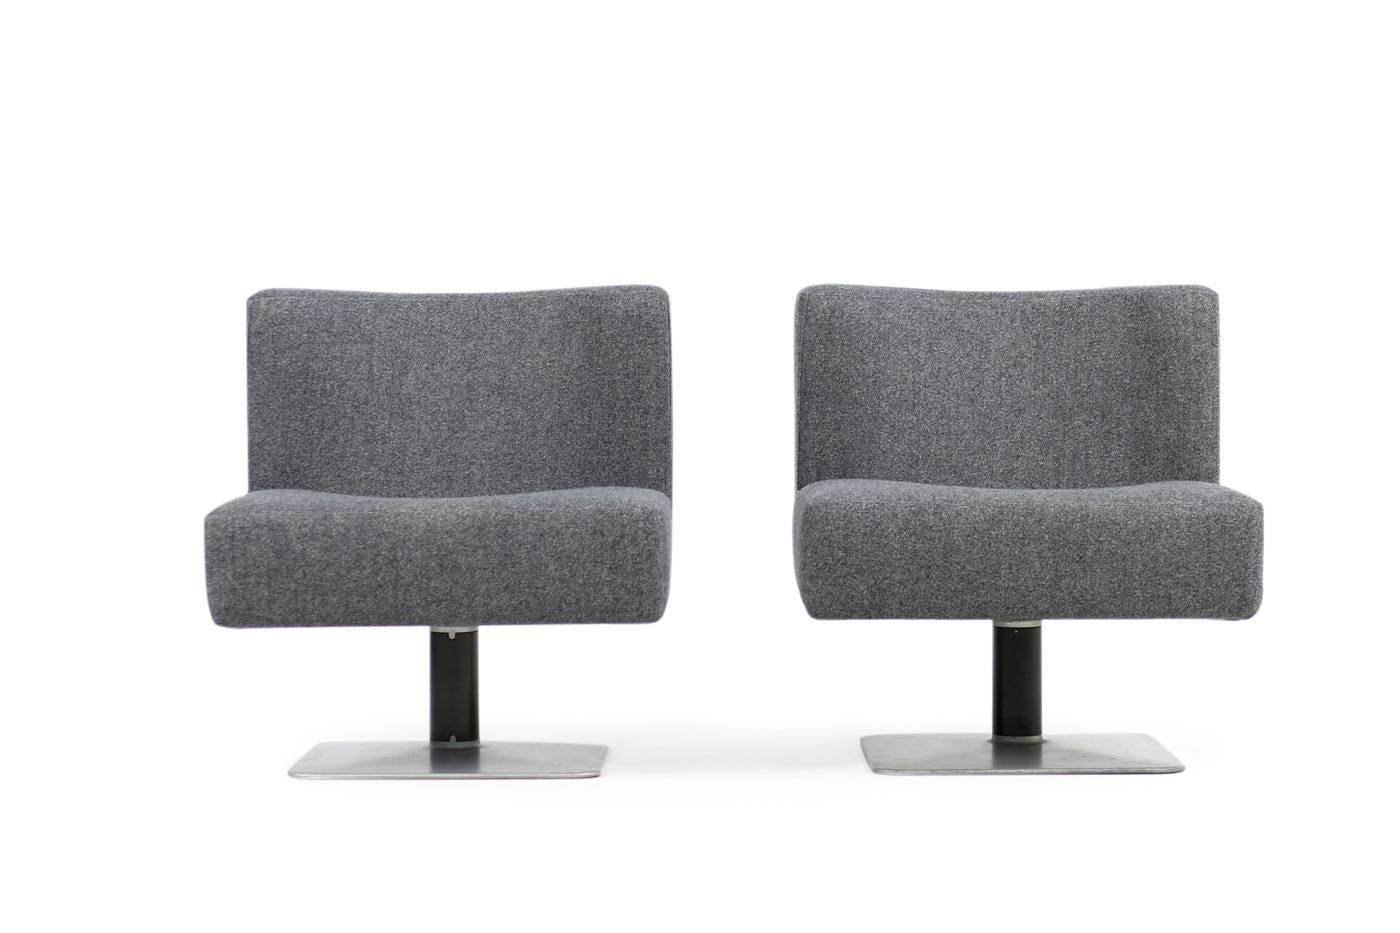 Beautiful pair of 1970s Herbert Hirche model 350 modular lounge chairs, made by Mauser Werke, circa 1974/1975
New upholstery and covered with grey wool woven fabric, metal and iron base, beautiful form and design. Each chair ca. W 69cm x D 67cm x H